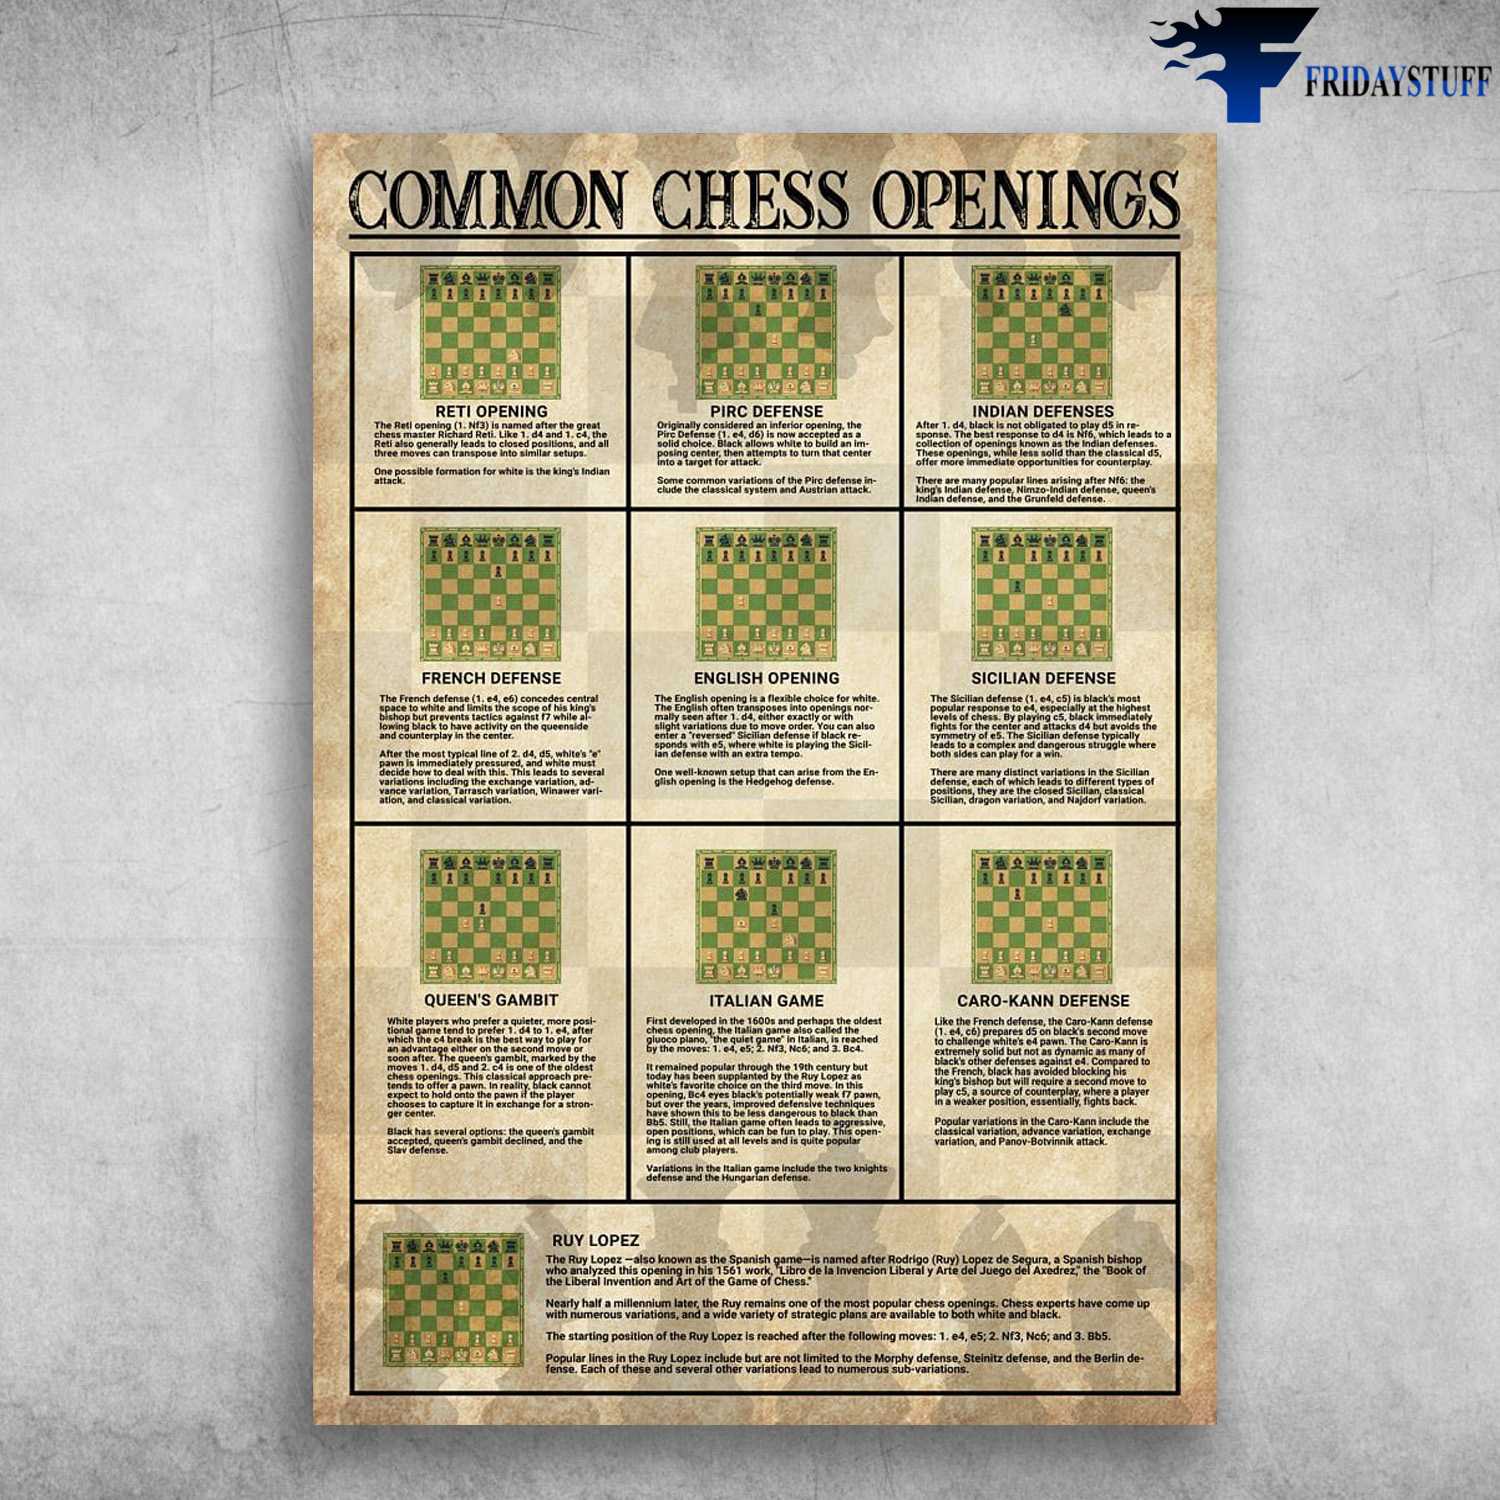 Common Chess Openings Chess Knowledge Poster the Rules of 